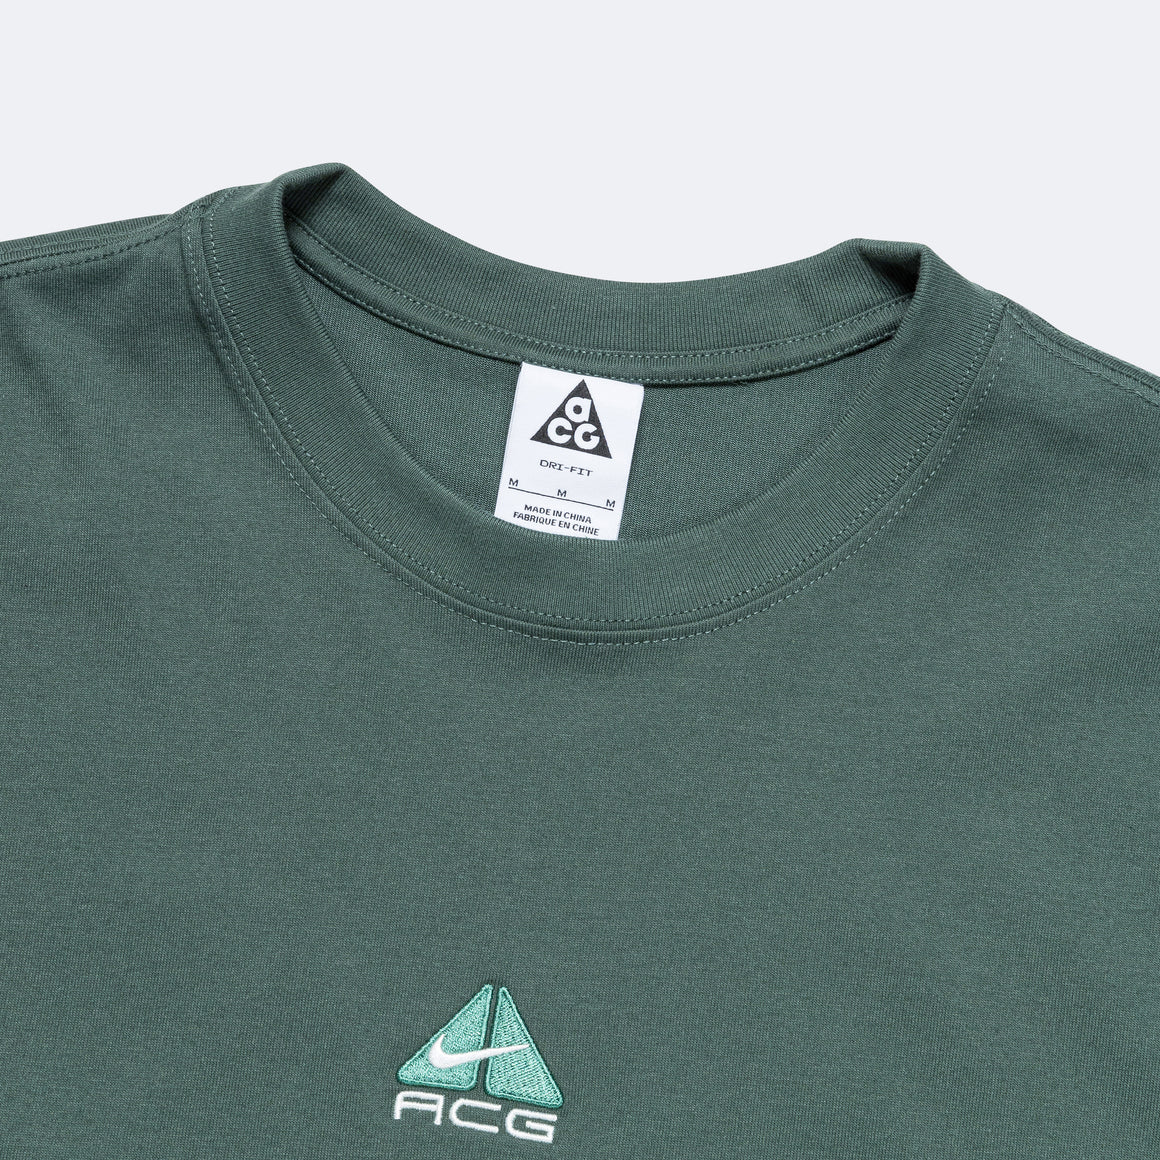 LBR Lungs SS Tee - Vintage Green